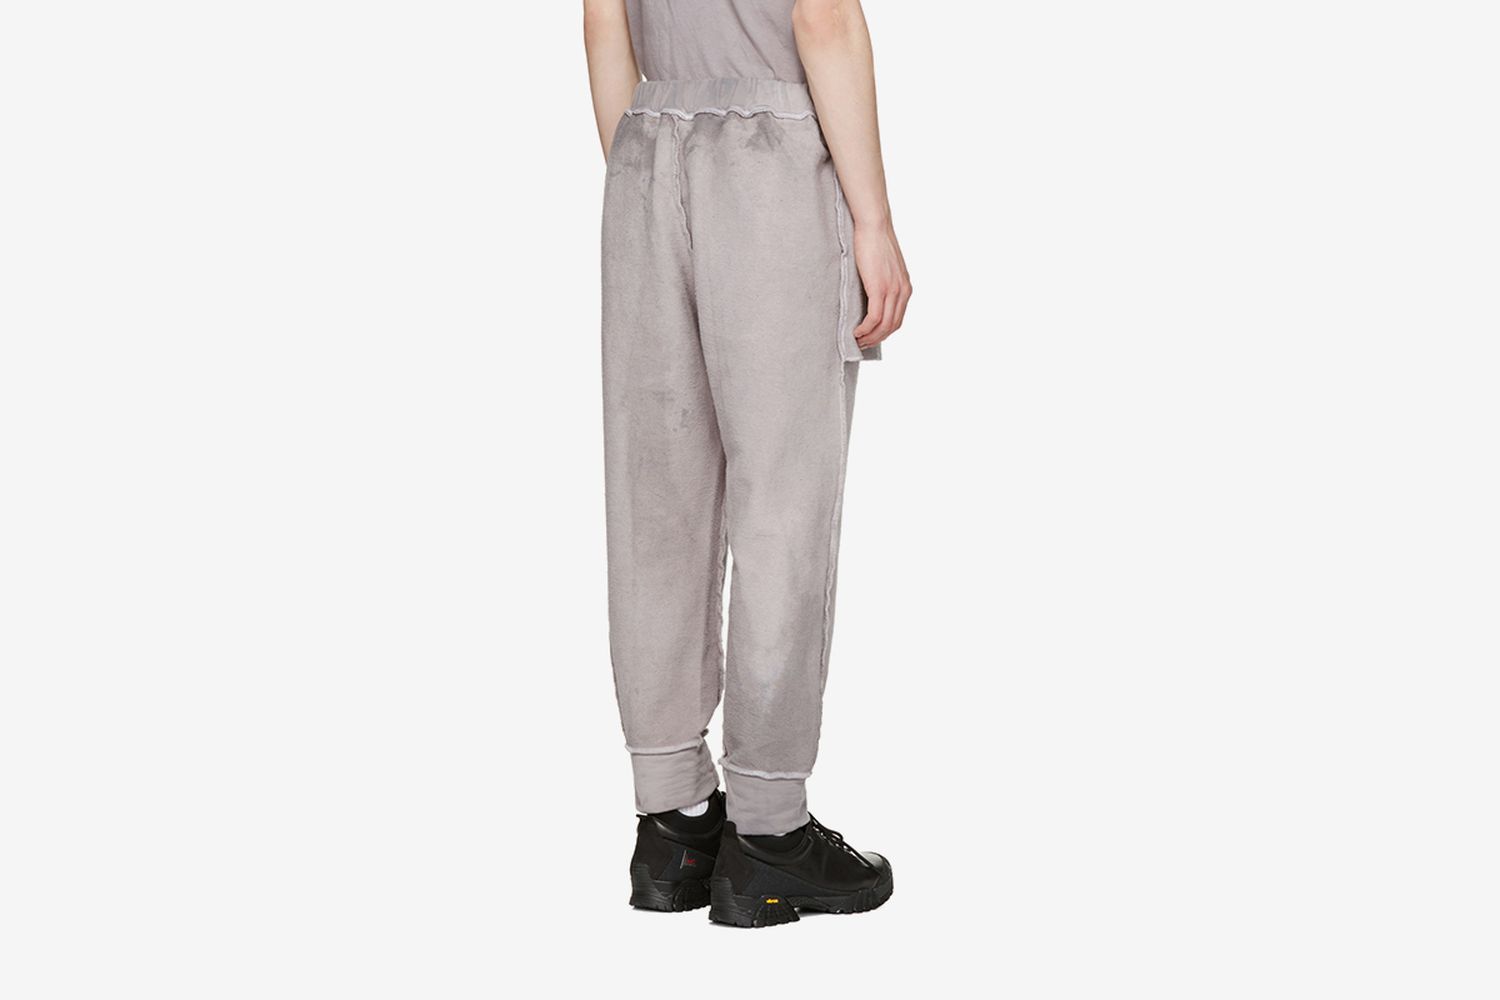 The Meeting Of Textures Sweatpants